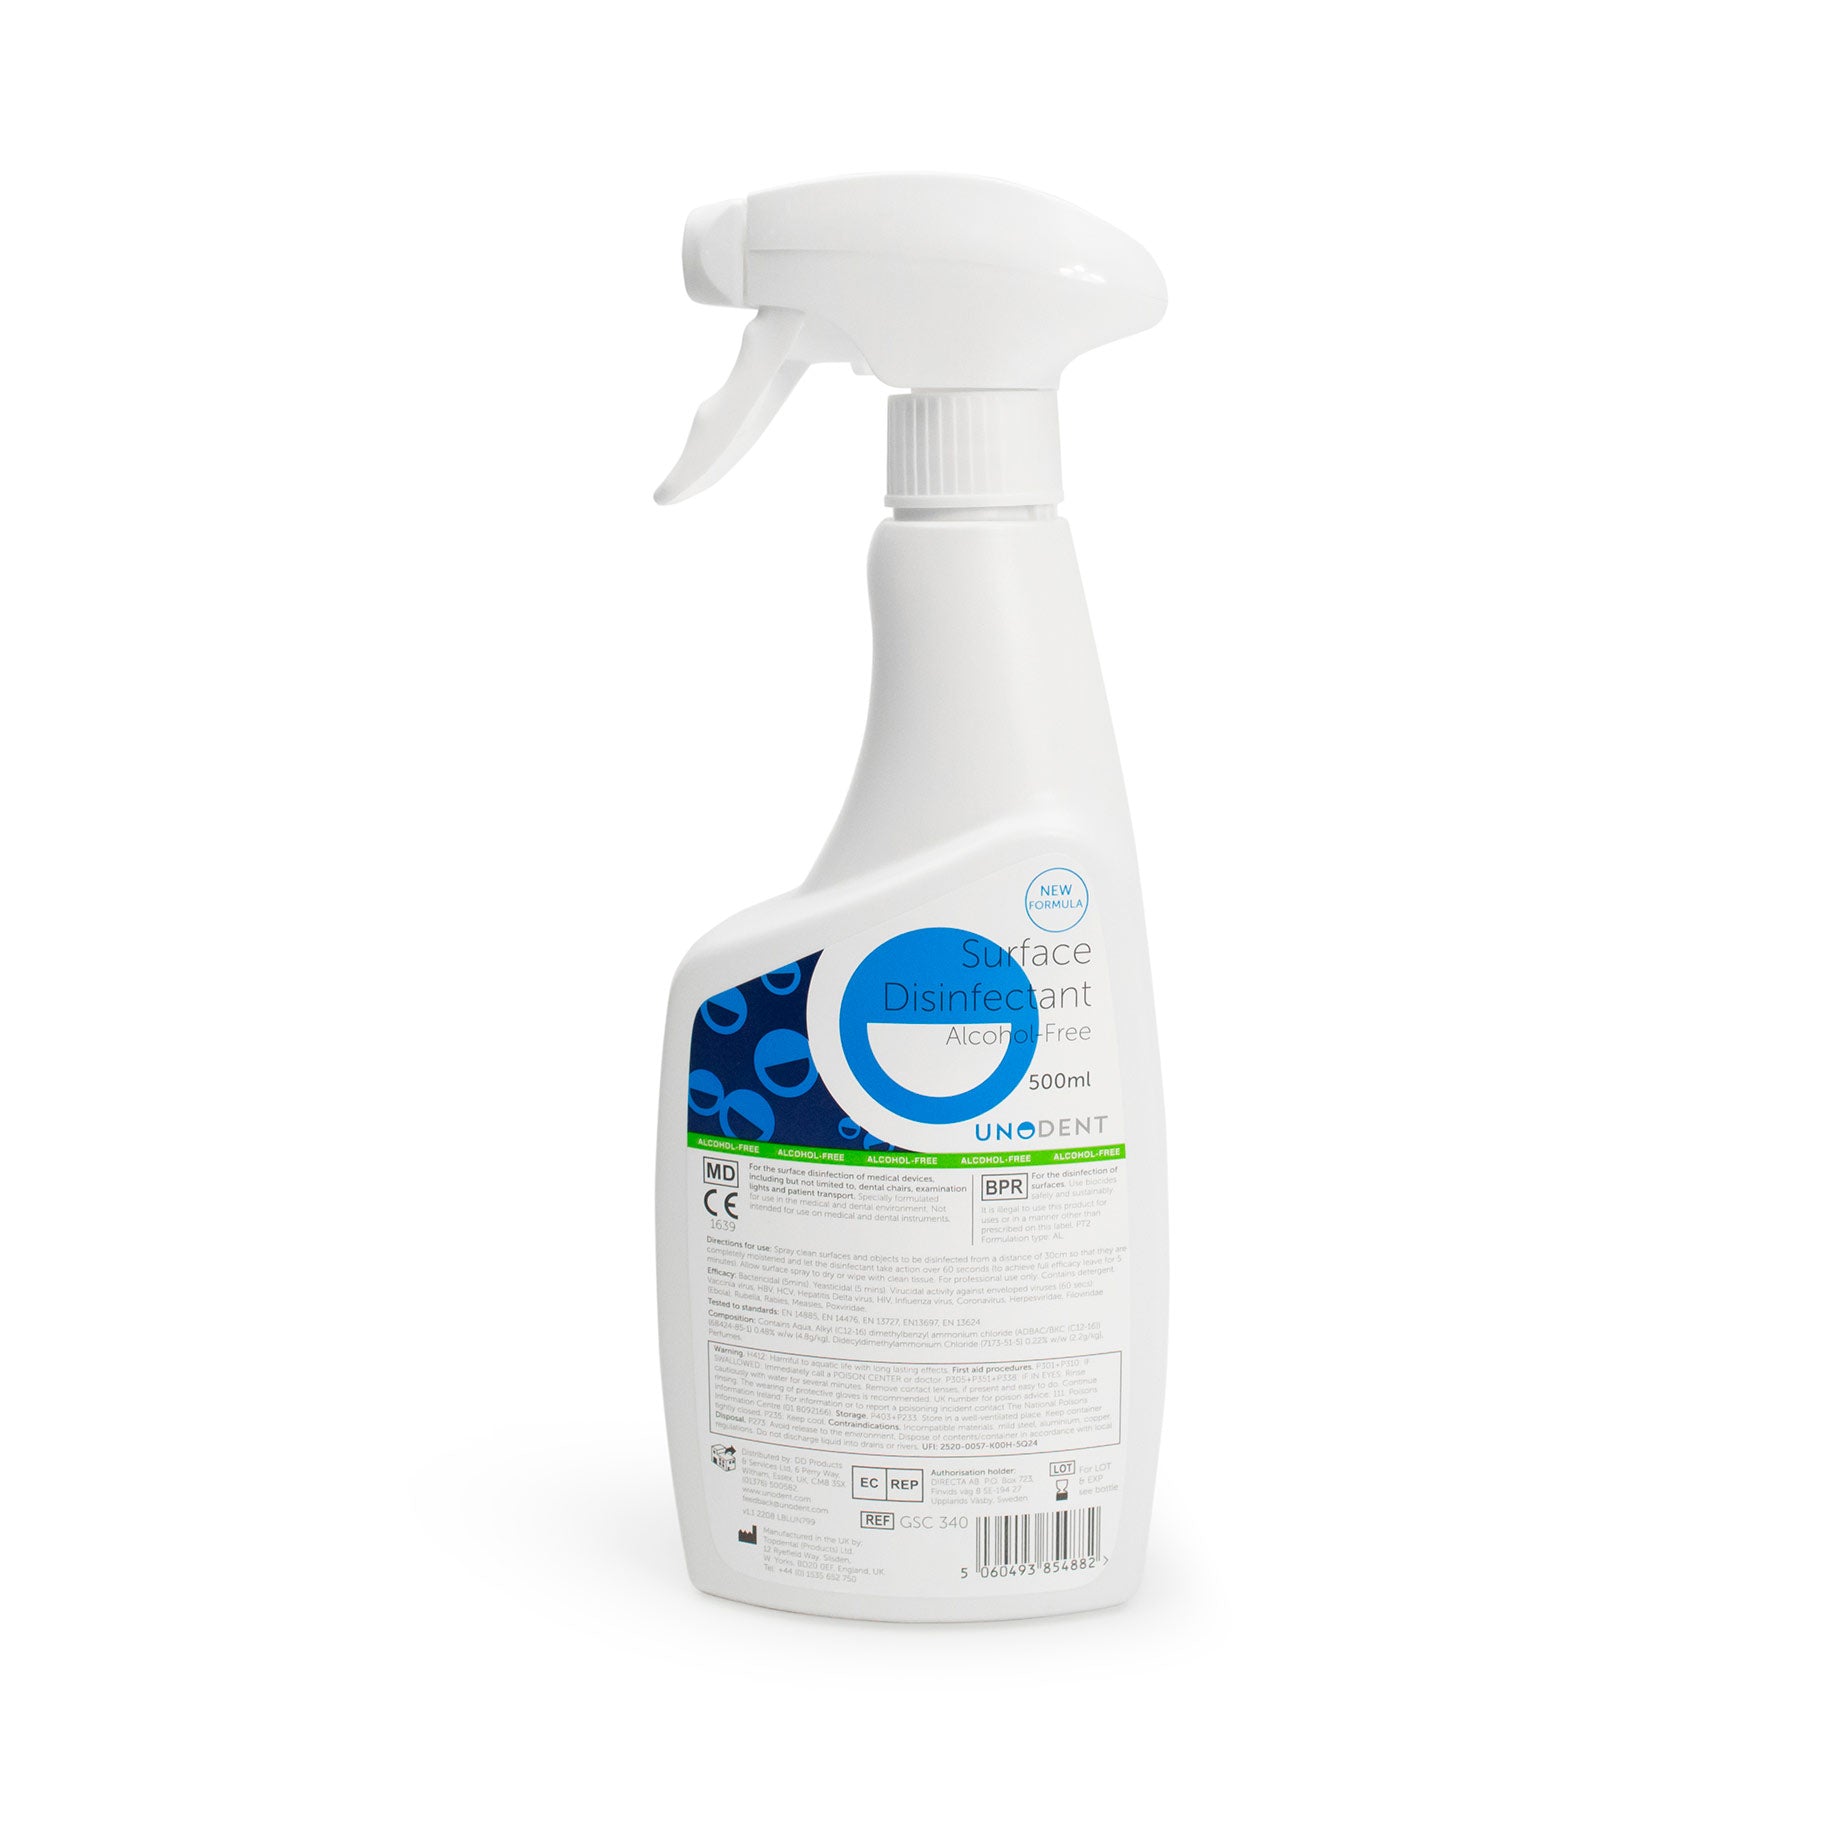 NEW Formulation Alcohol-Free Hard Surface Disinfectant Spray With Trigger